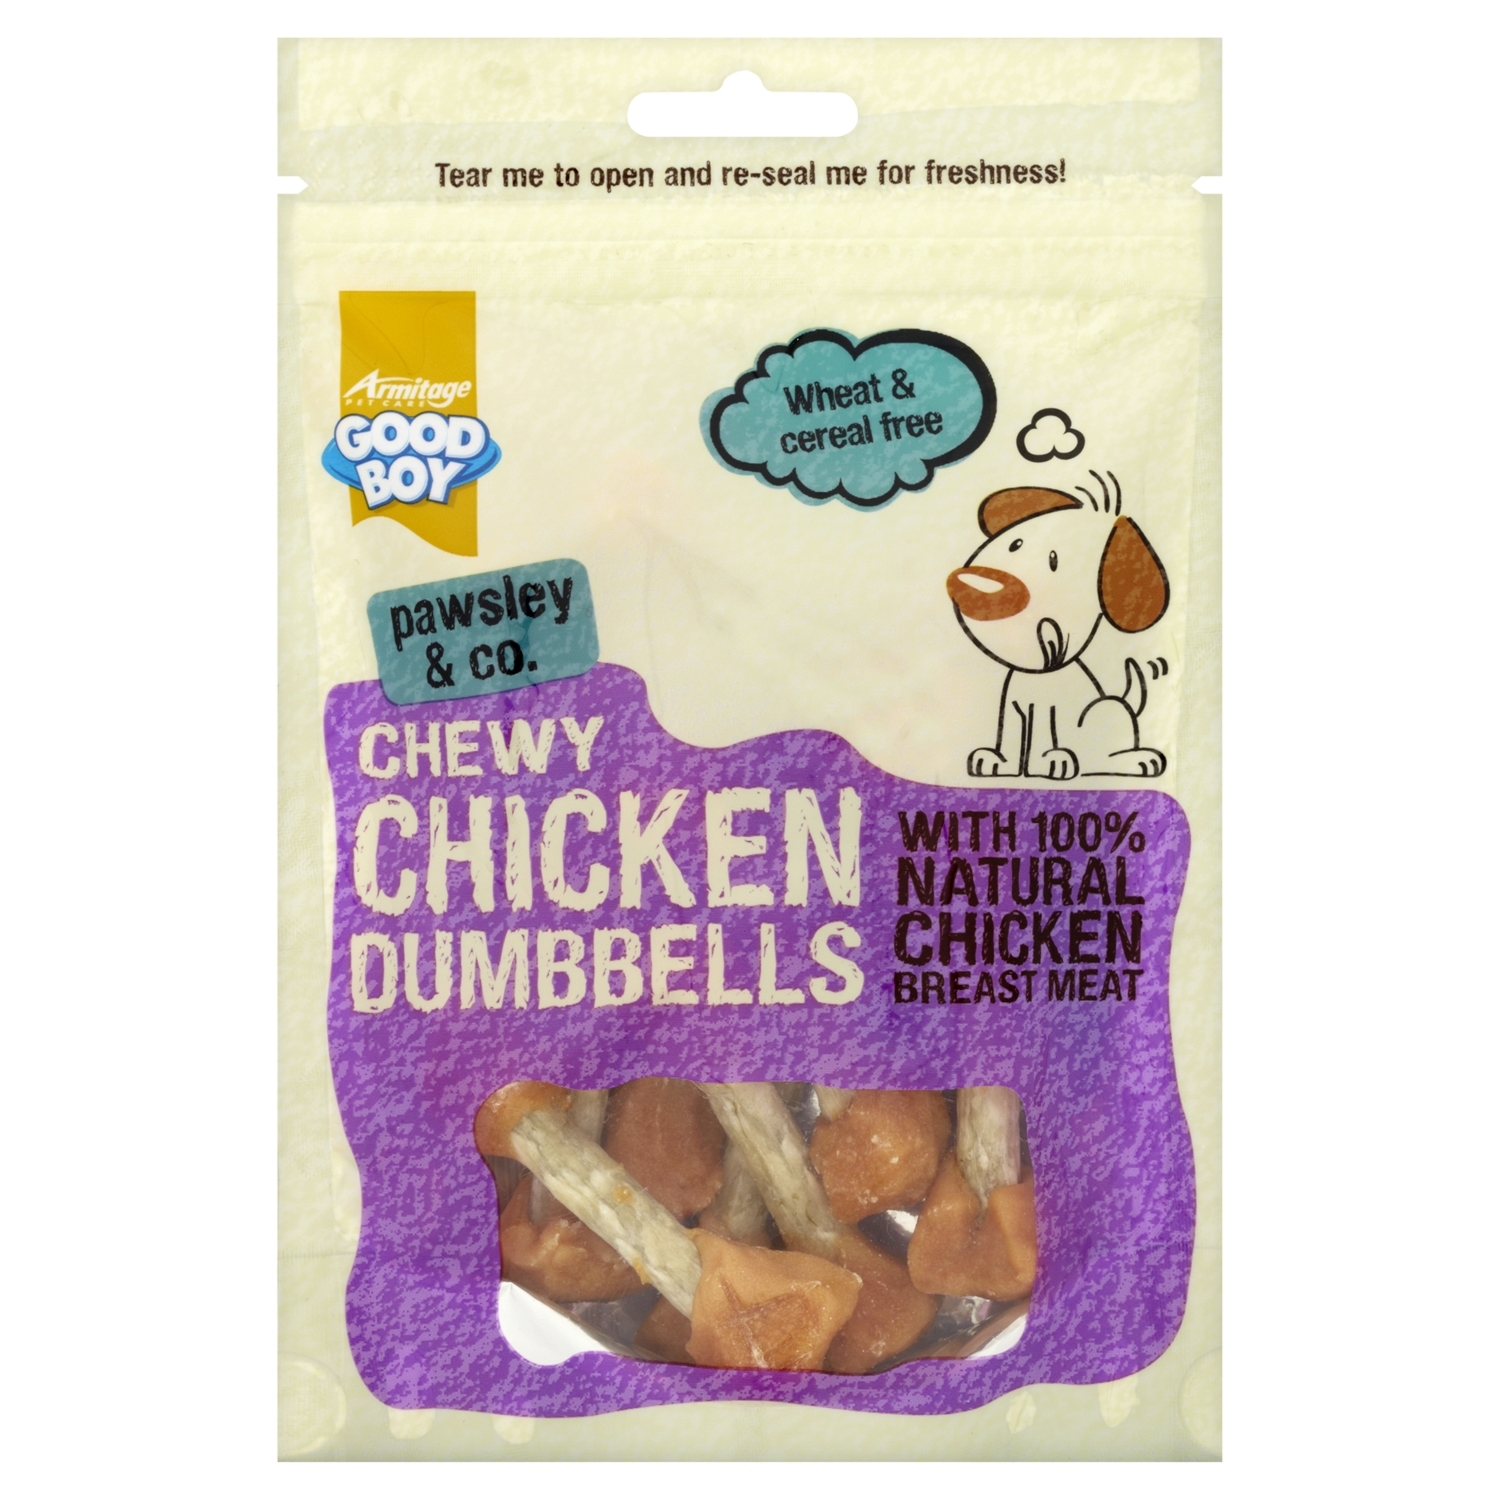 Good Boy Pawsley Chewy Chicken Dumbbell Dog Treat 100g Image